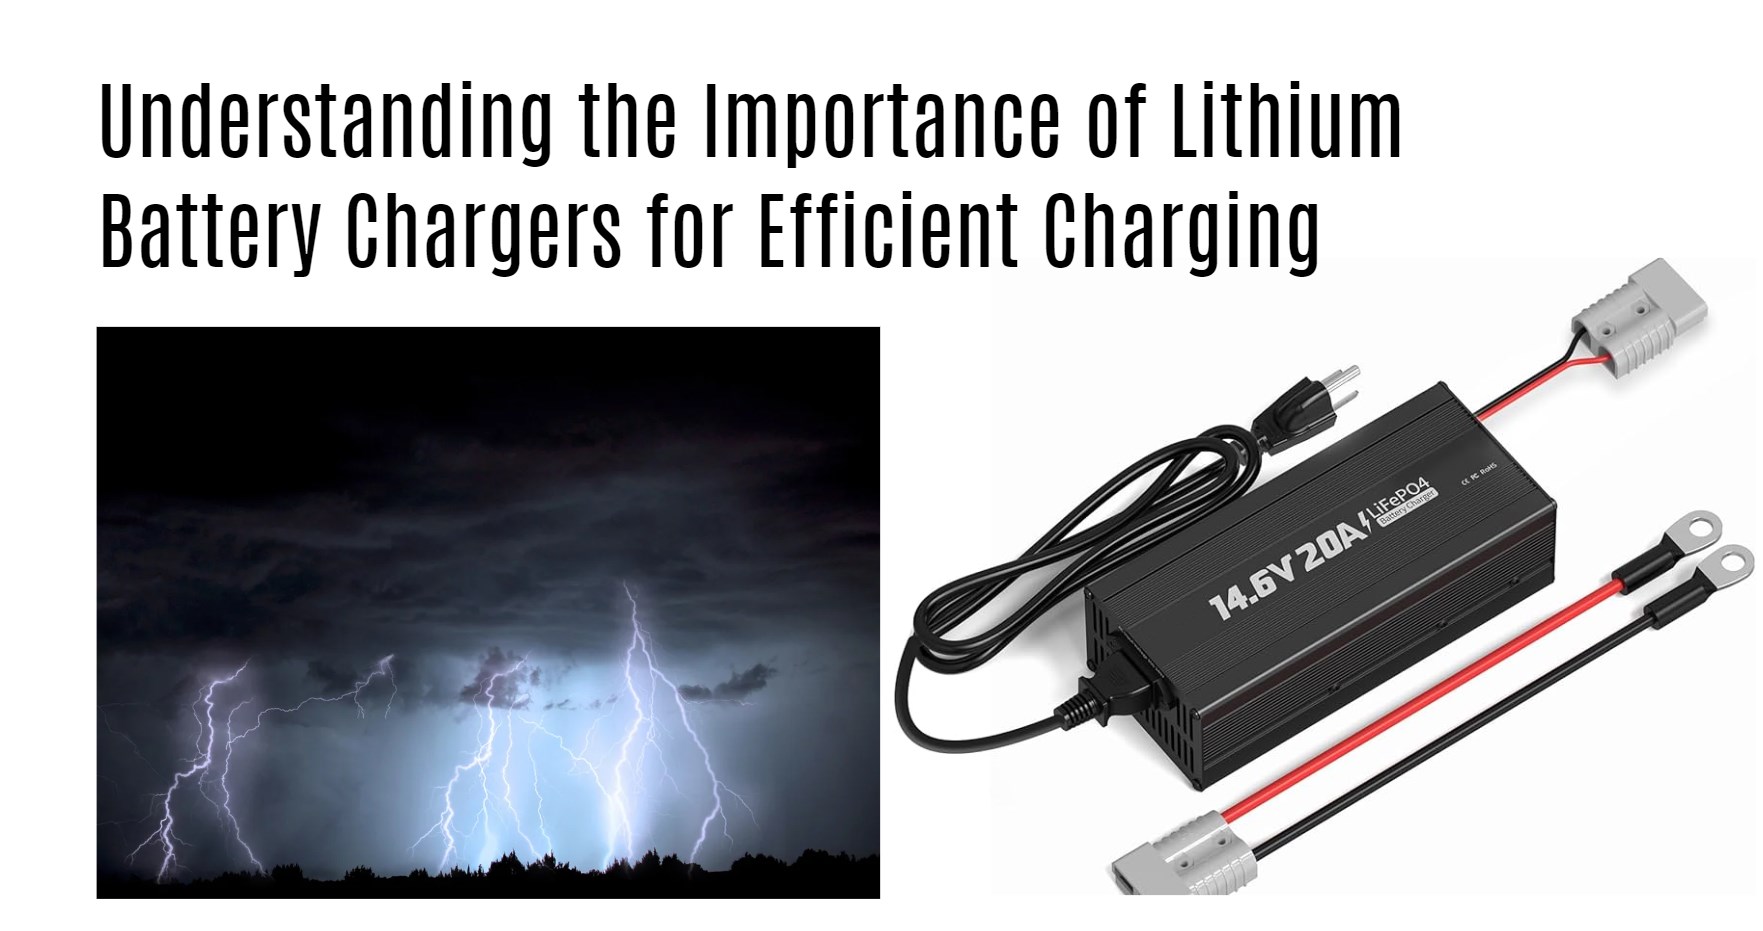 Understanding the Importance of Lithium Battery Chargers for Efficient Charging